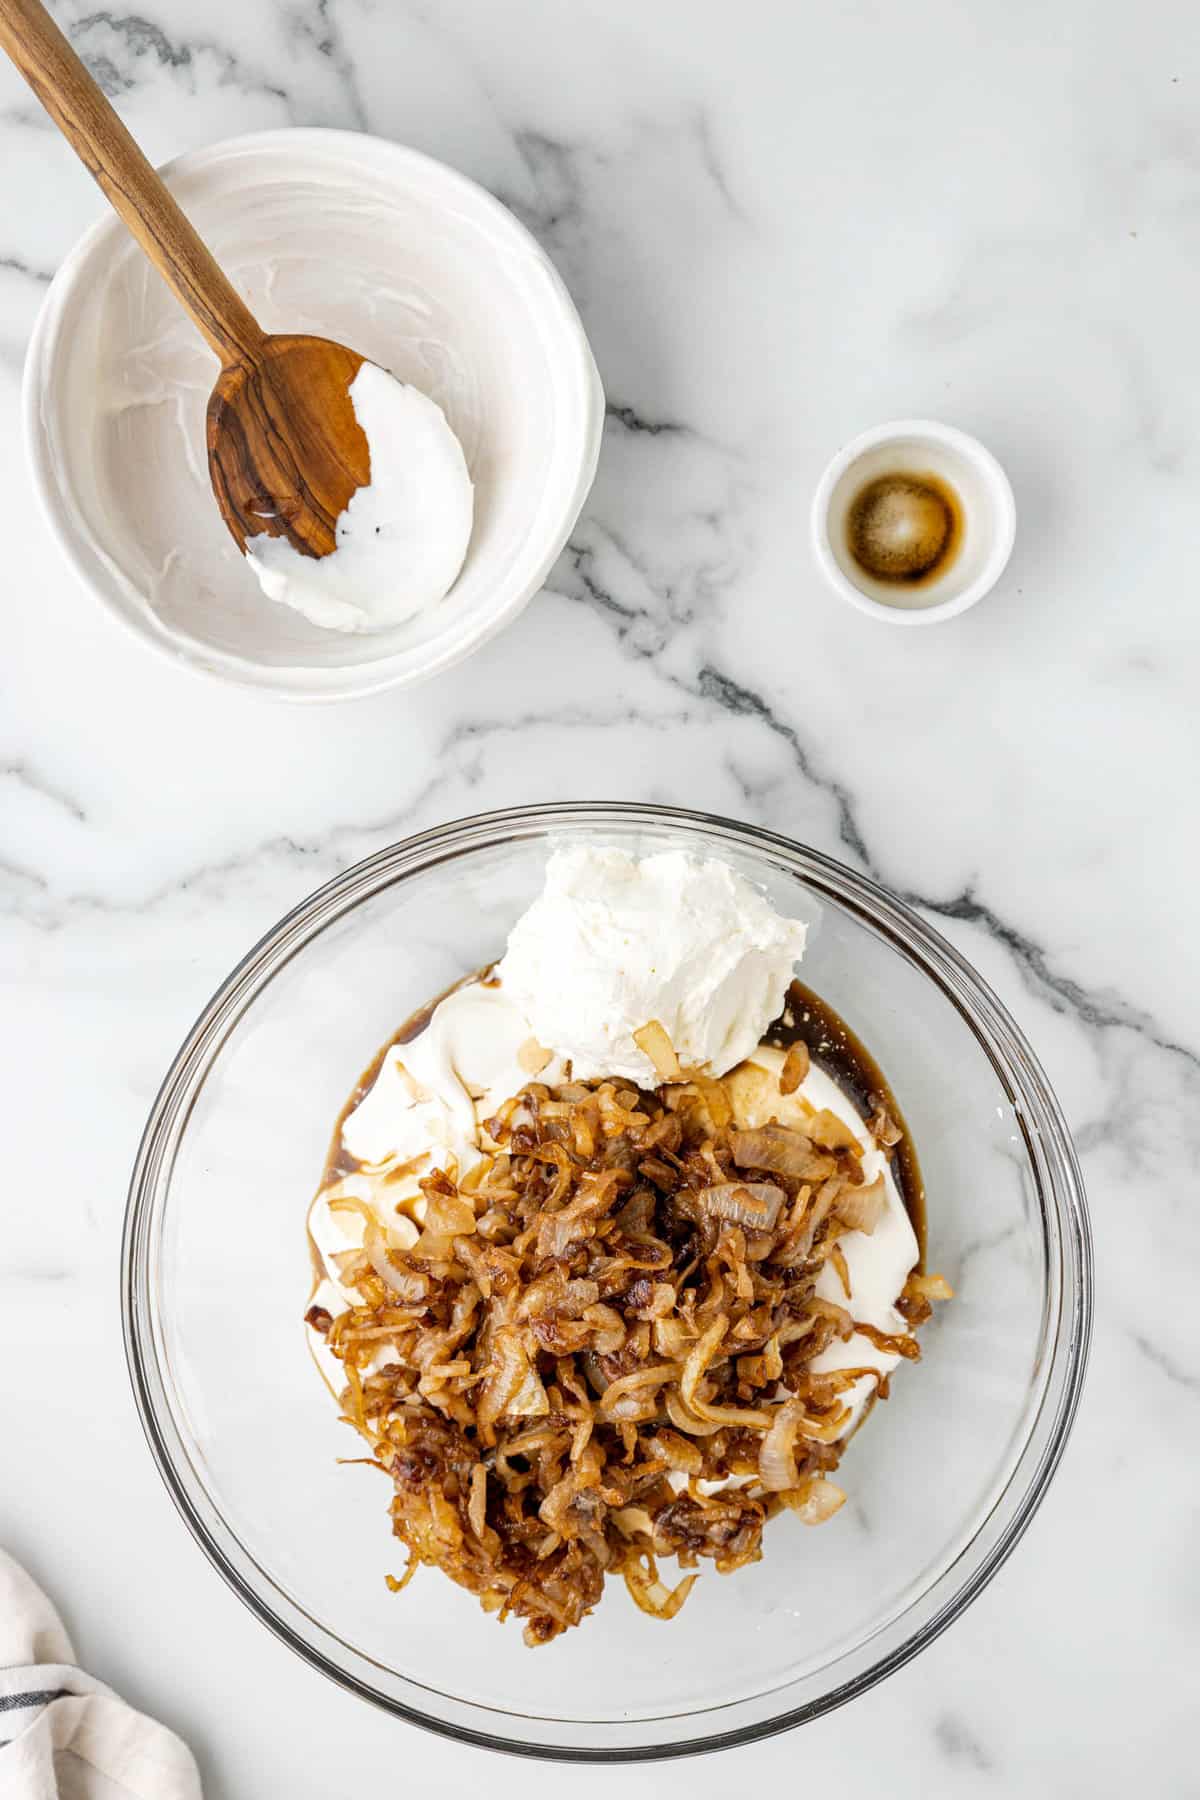 Overhead Image of Caramelized Onion with Dip Ingredients